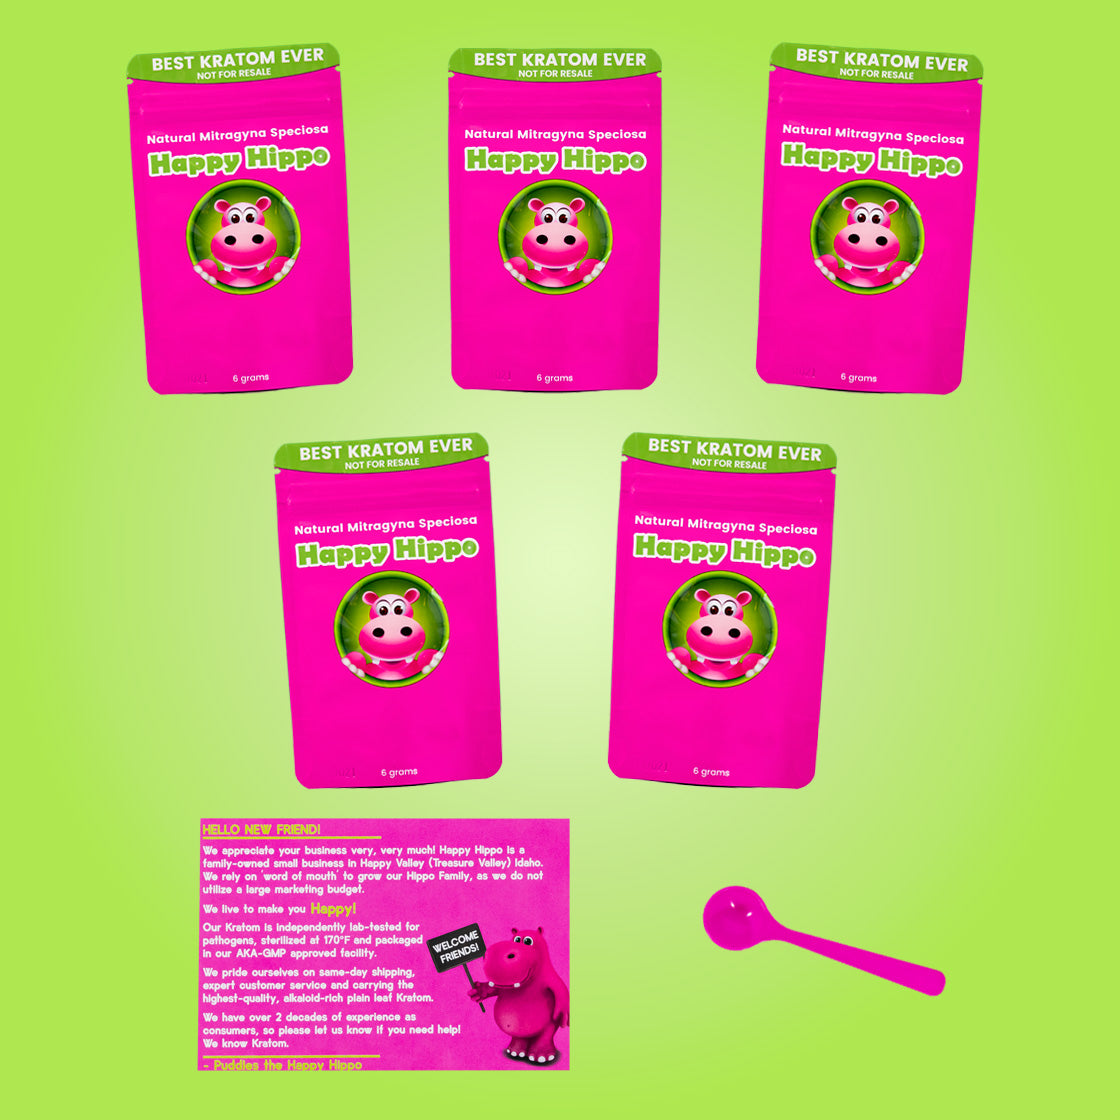 Product image of 5 randomized 6-gram resealable packets of Happy Hippo brand Kratom Powders, as well as a 1-gram little pink measuring scoop.